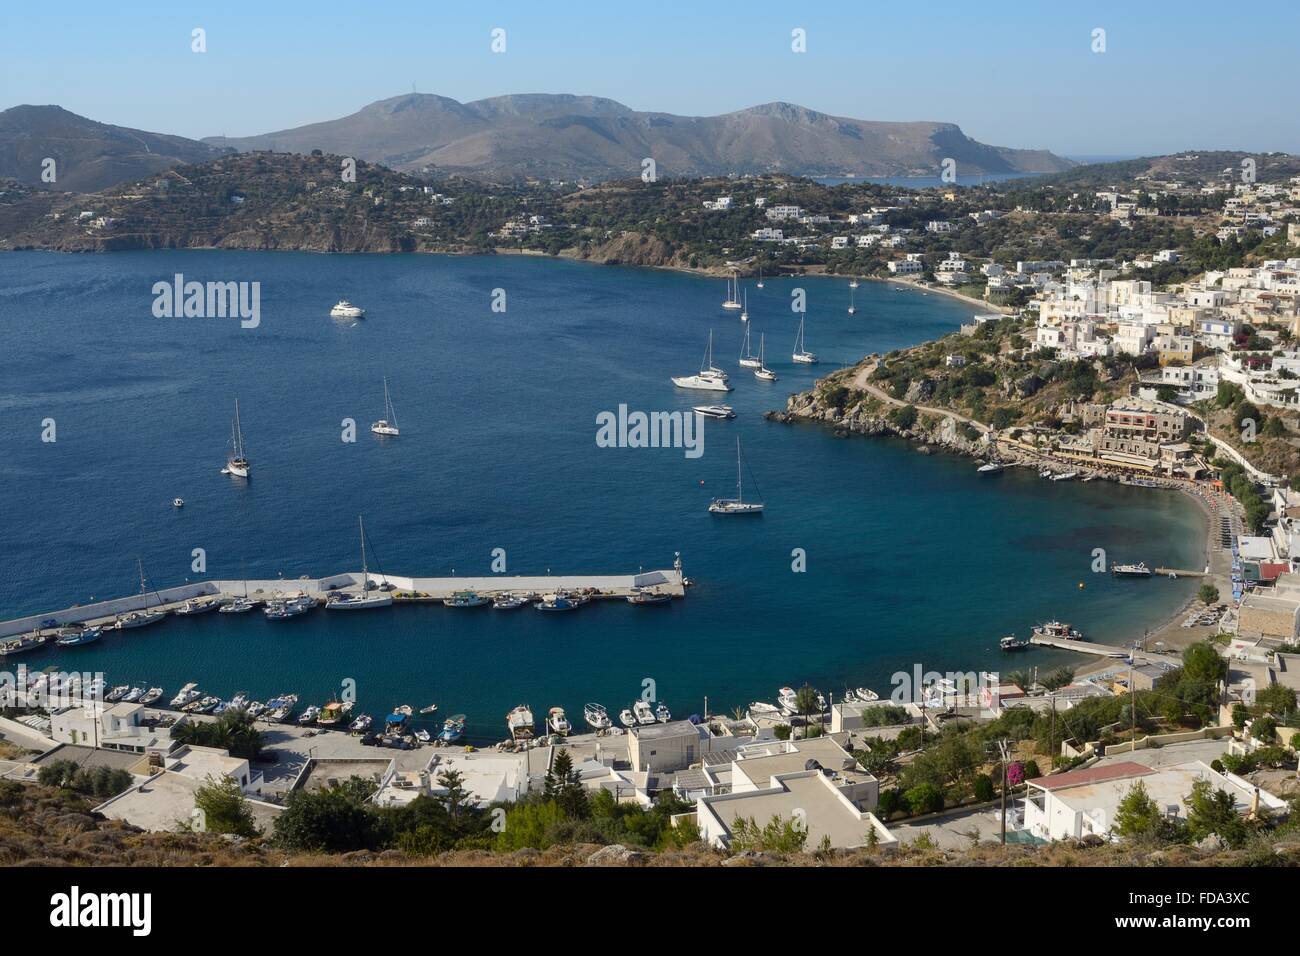 Overview of Panteli harbour and village, Leros, Dodecanese Islands, Greece. Stock Photo